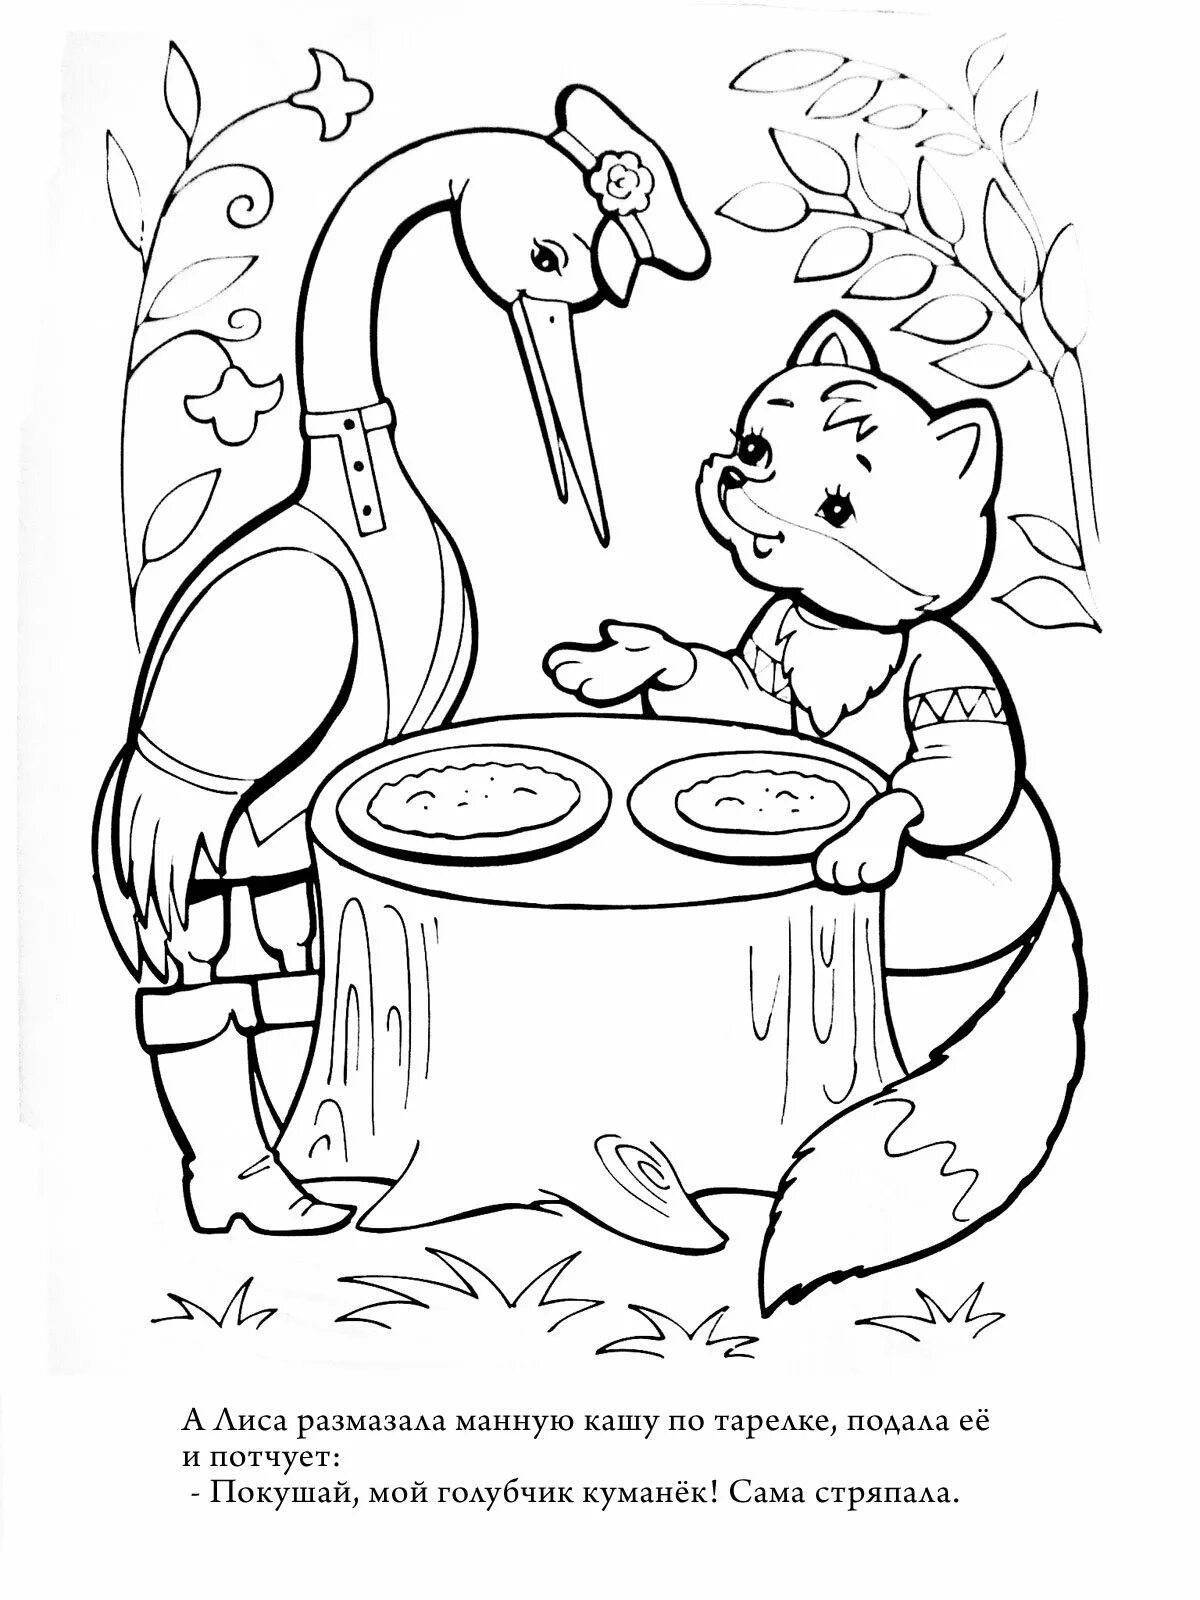 Inspirational coloring book based on fairy tales for children Russian people